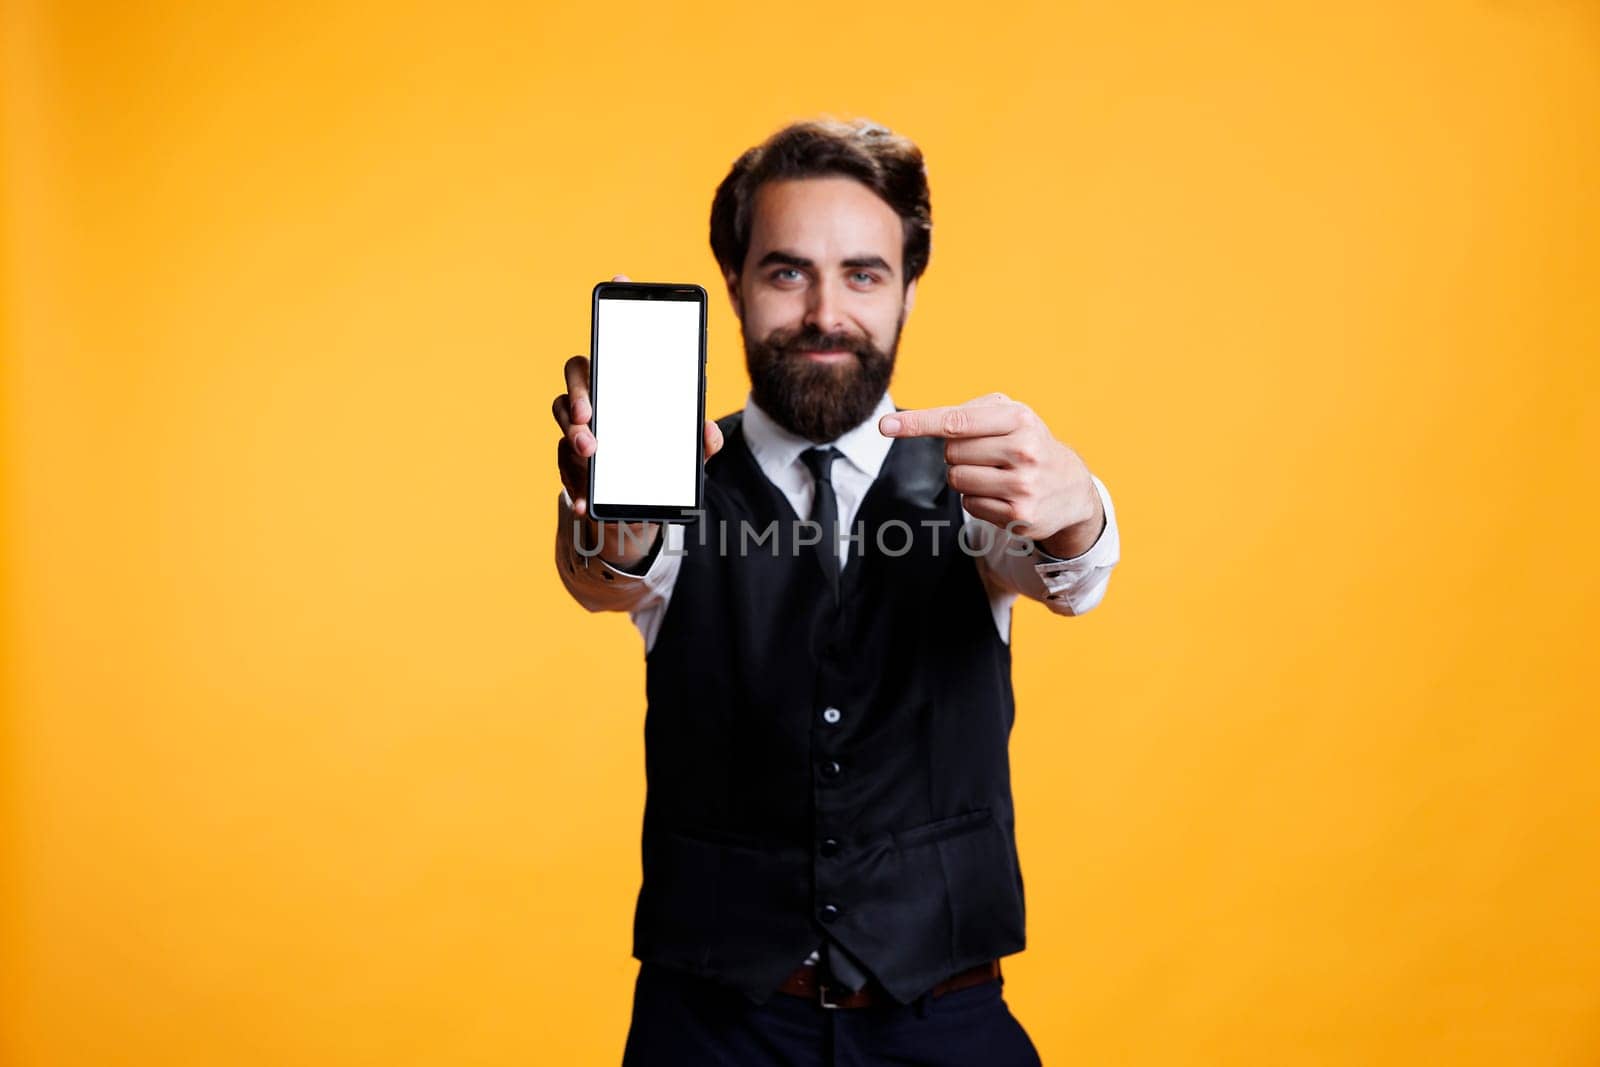 Confident waiter points to white screen on camera, presenting isolated mockup blank display on mobile phone. Young butler with suit and tie shows empty device with copyspace template.